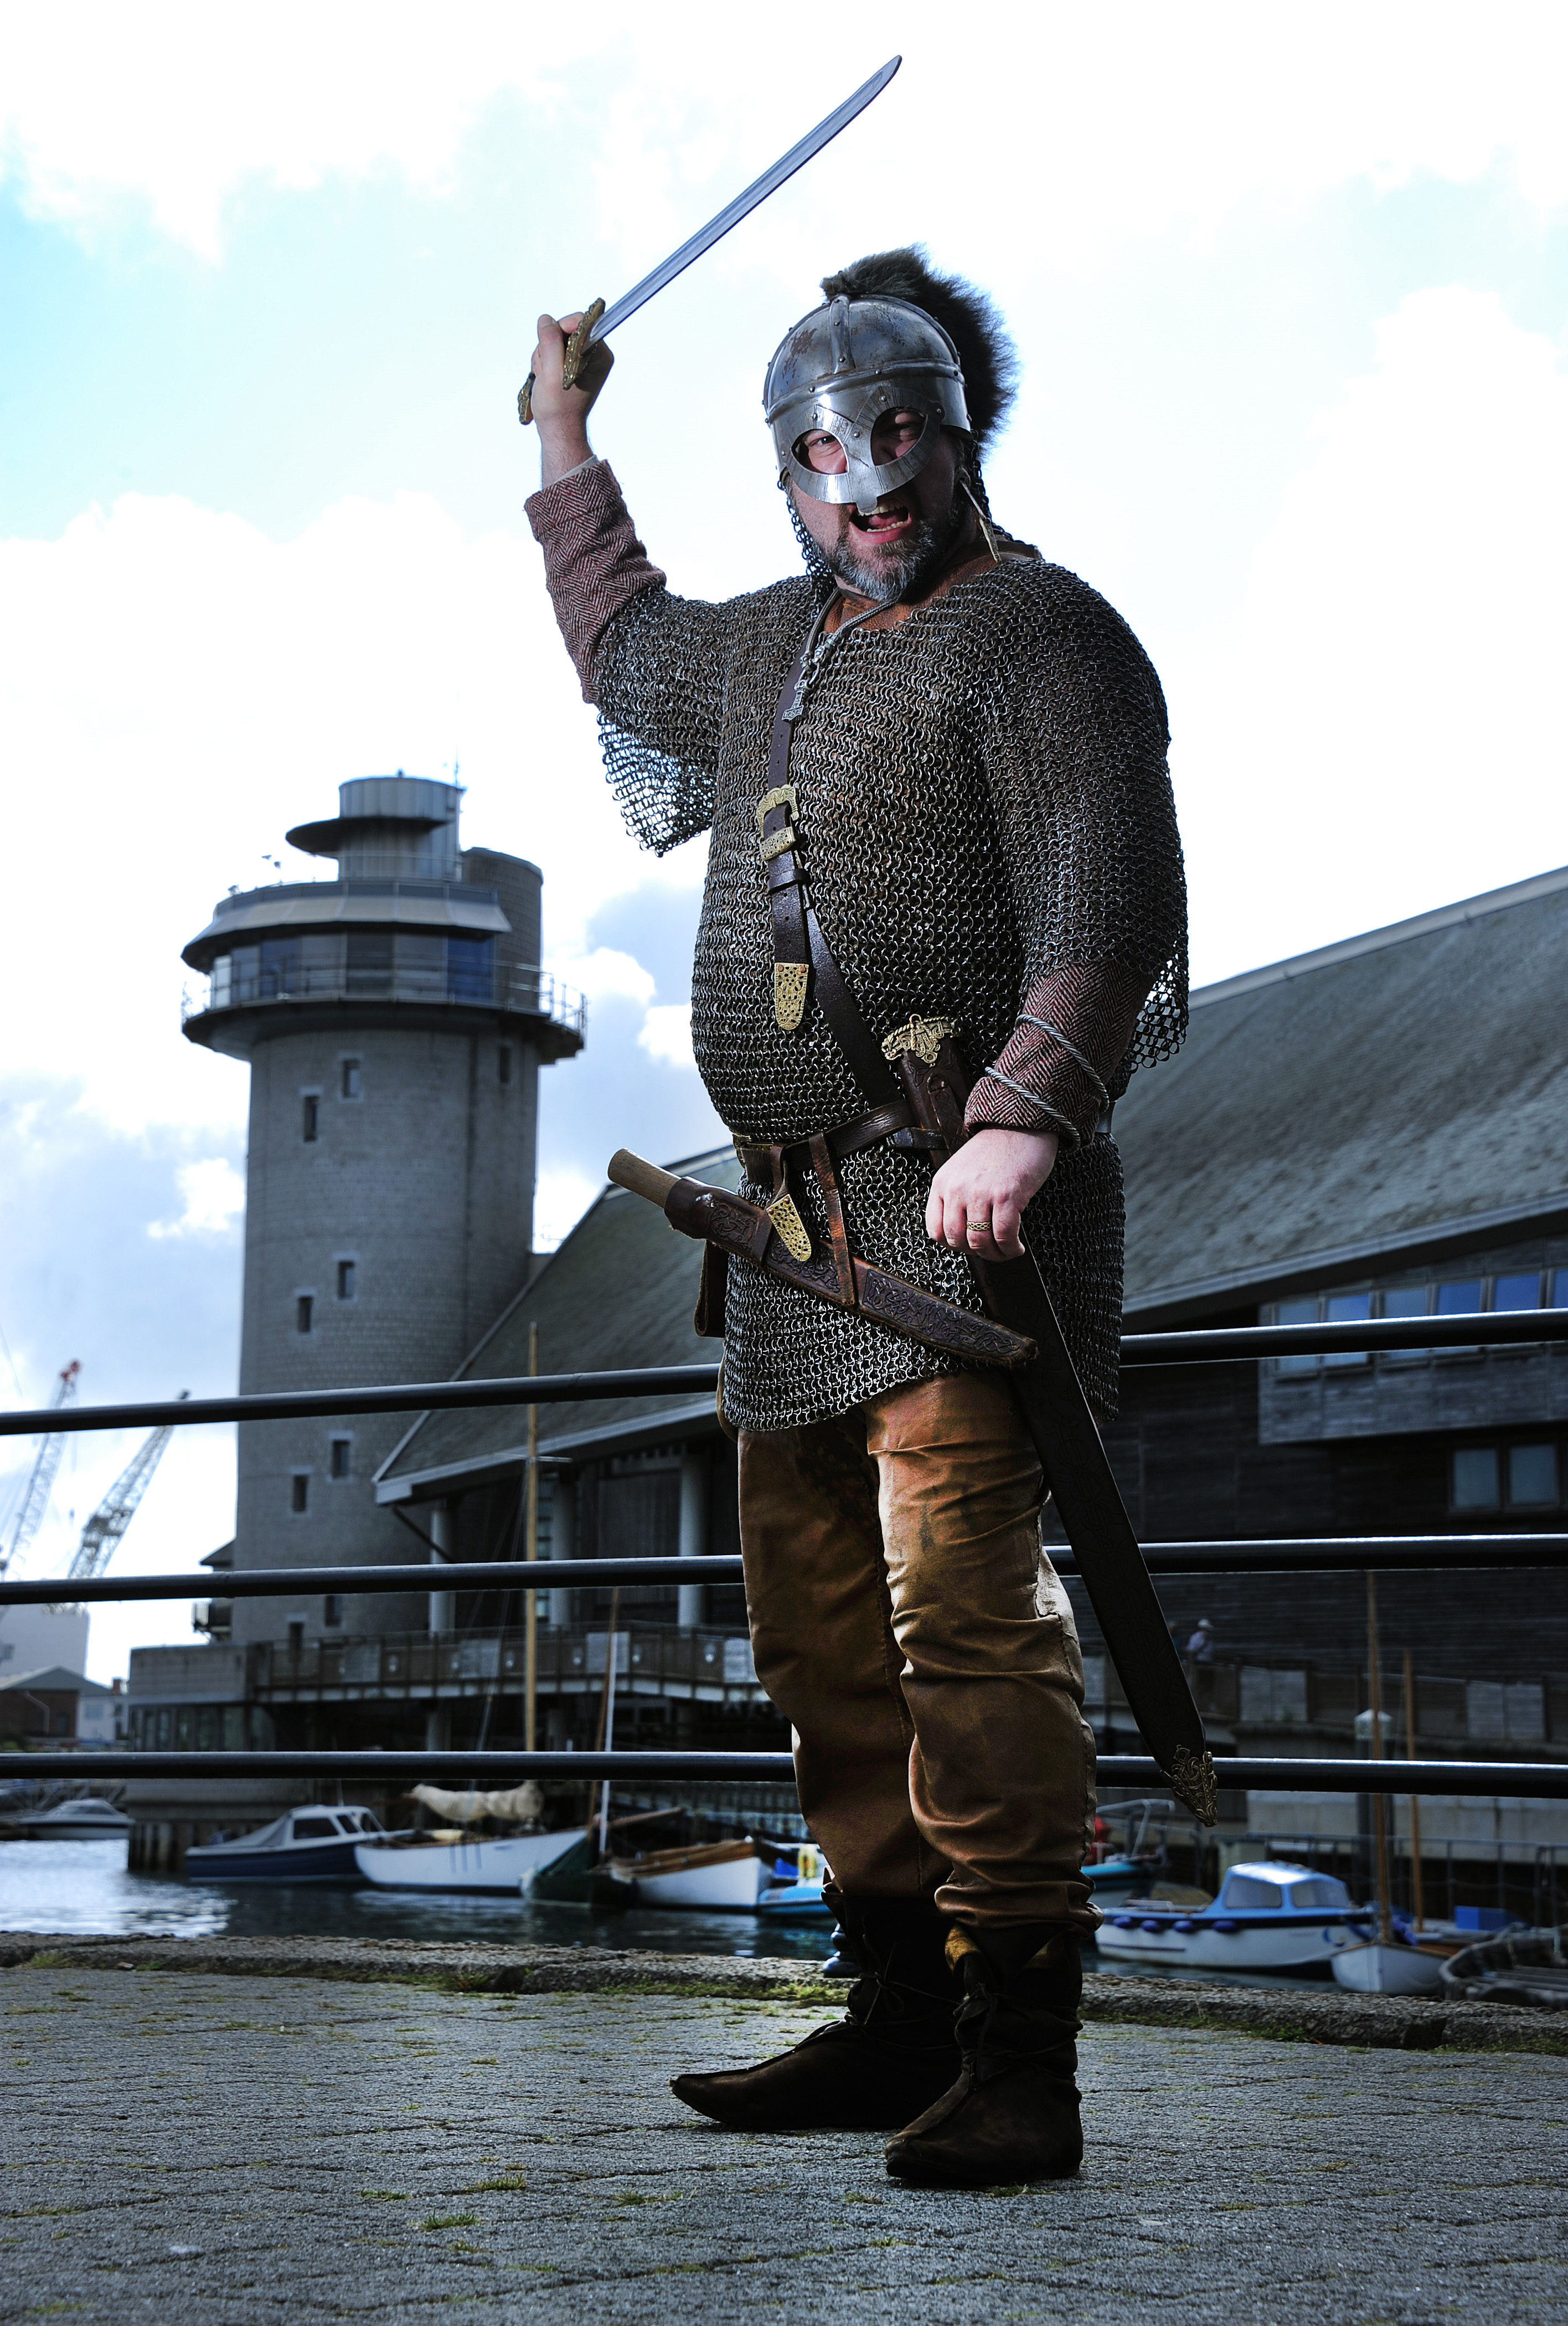 The Vikings are coming to the National Maritime Museum Cornwall